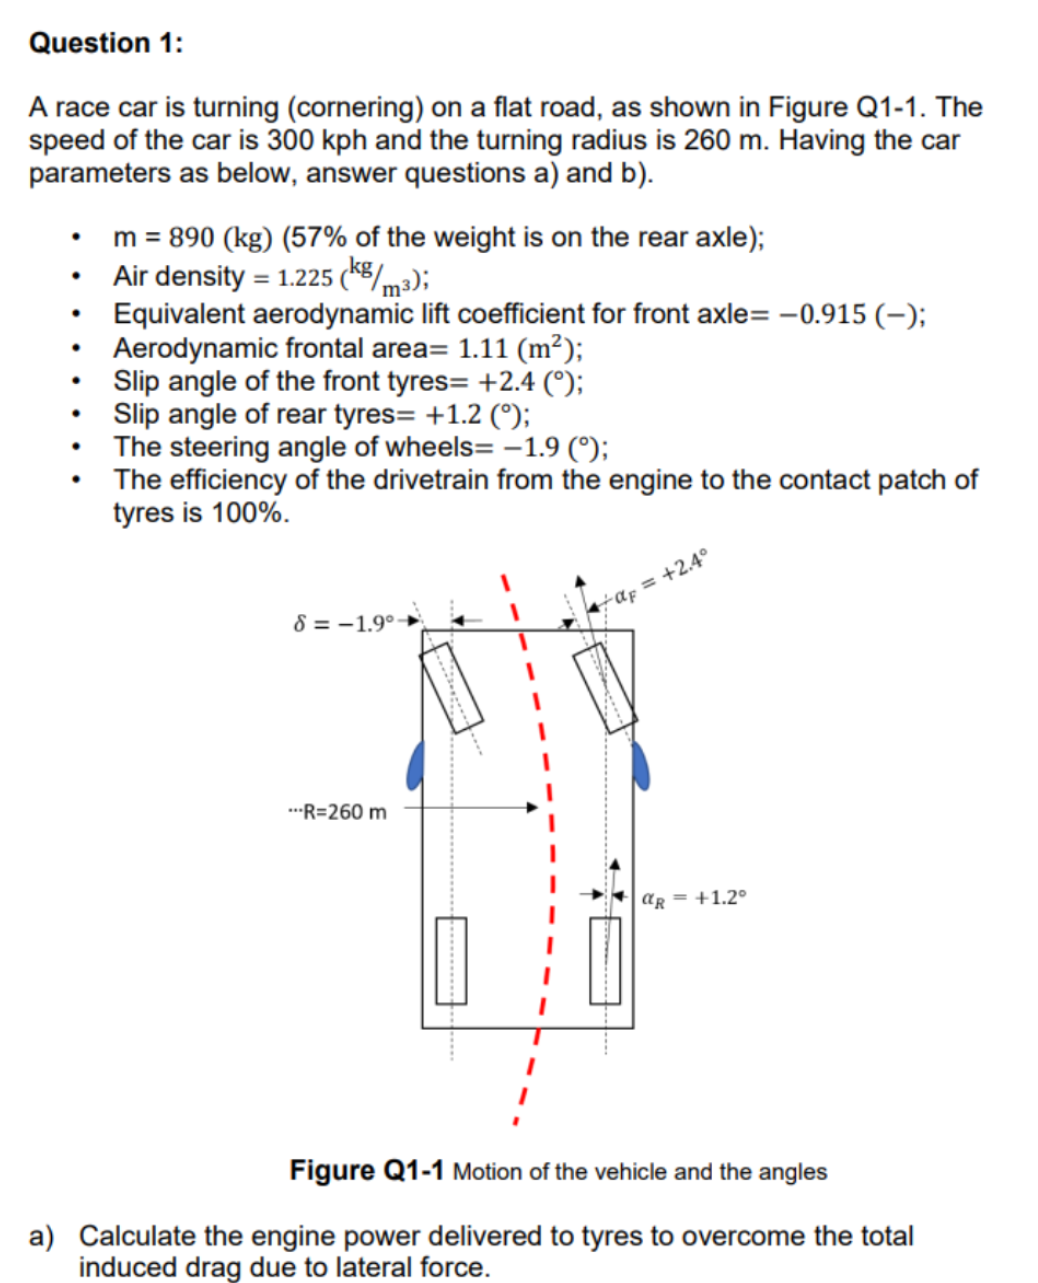 Question 1:
A race car is turning (cornering) on a flat road, as shown in Figure Q1-1. The
speed of the car is 300 kph and the turning radius is 260 m. Having the car
parameters as below, answer questions a) and b).
●
.
●
●
m = 890 (kg) (57% of the weight is on the rear axle);
Air density = 1.225 (kg/m3);
Equivalent aerodynamic lift coefficient for front axle= -0.915 (-);
Aerodynamic frontal area= 1.11 (m²);
Slip angle of the front tyres= +2.4 (°);
Slip angle of rear tyres= +1.2 (°);
The steering angle of wheels= -1.9 (°);
The efficiency of the drivetrain from the engine to the contact patch of
tyres is 100%.
8=-1.9°-
---R=260 m
α = +2.4°
αR = +1.2°
Figure Q1-1 Motion of the vehicle and the angles
a) Calculate the engine power delivered to tyres to overcome the total
induced drag due to lateral force.